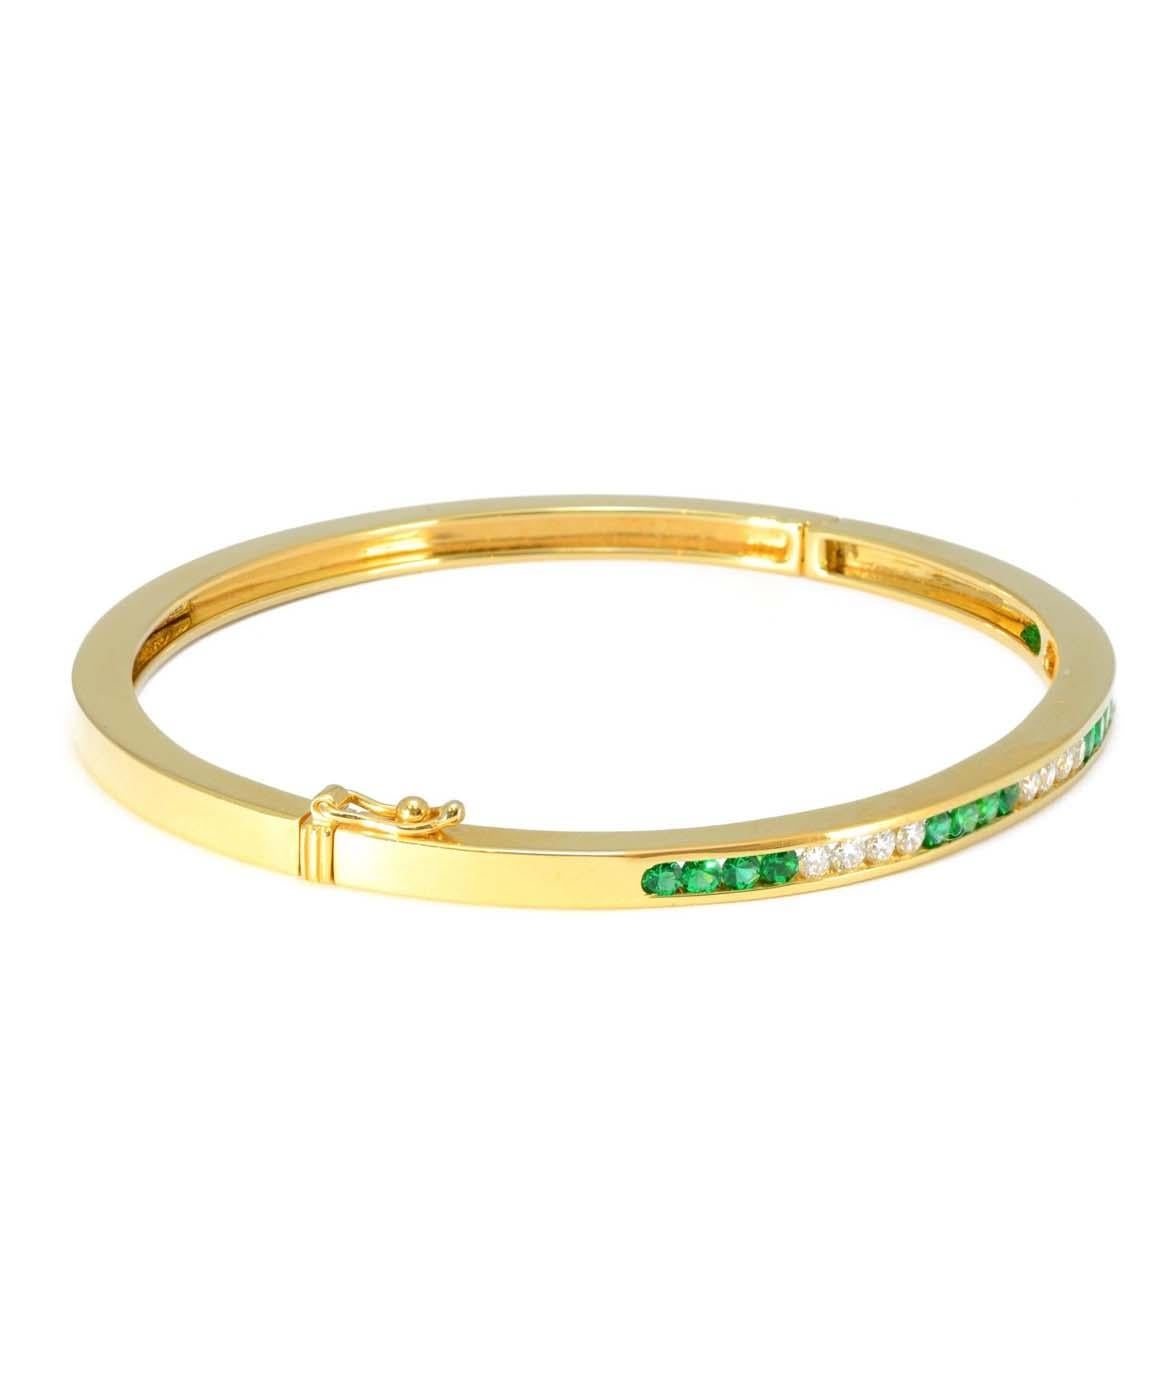 This 100% Authentic Tiffany & Co Solid 18K Yellow Gold Emerald & Diamond Bangle is in excellent condition! The inside of the bangle measures approximately 2.1 inches X 1.9 inches. There are 12 diamonds weighing approximately 0.36cttw & 16 emeralds.